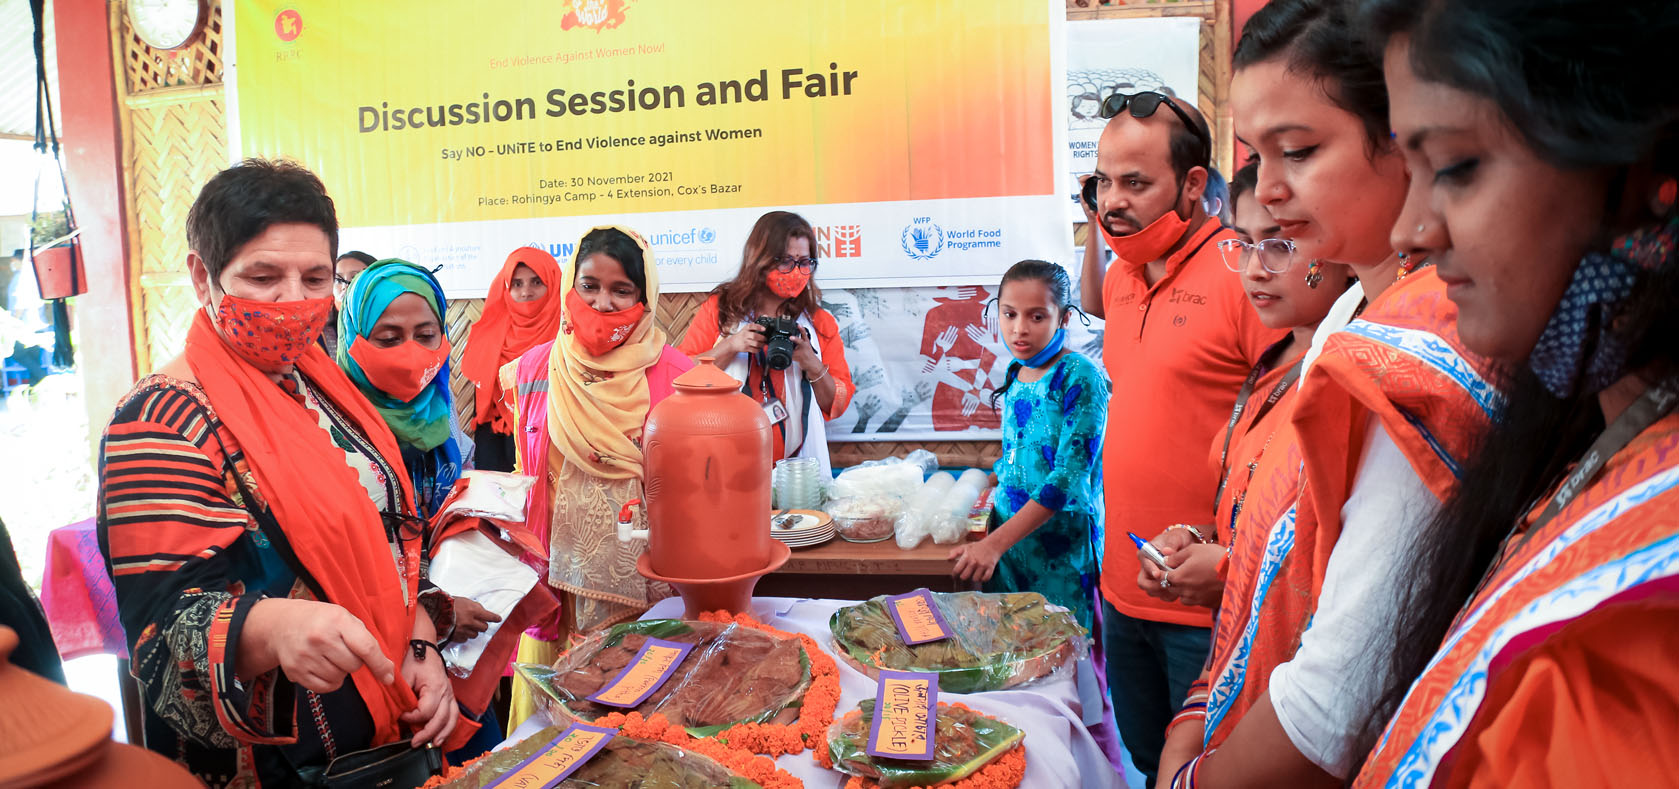 Flora Macula, left, UN Women Sub-office Head in Cox’s Bazar, Bangladesh, buys traditional Bengali food at a fair UN Women helped organize in Rohingya Camp-4 Extension in Cox’s Bazar on 30 November 2021. The fair was part of events during the United Nations 16 Days of Activism against Gender-based Violence. Photo: UN Women/Shataw Nur